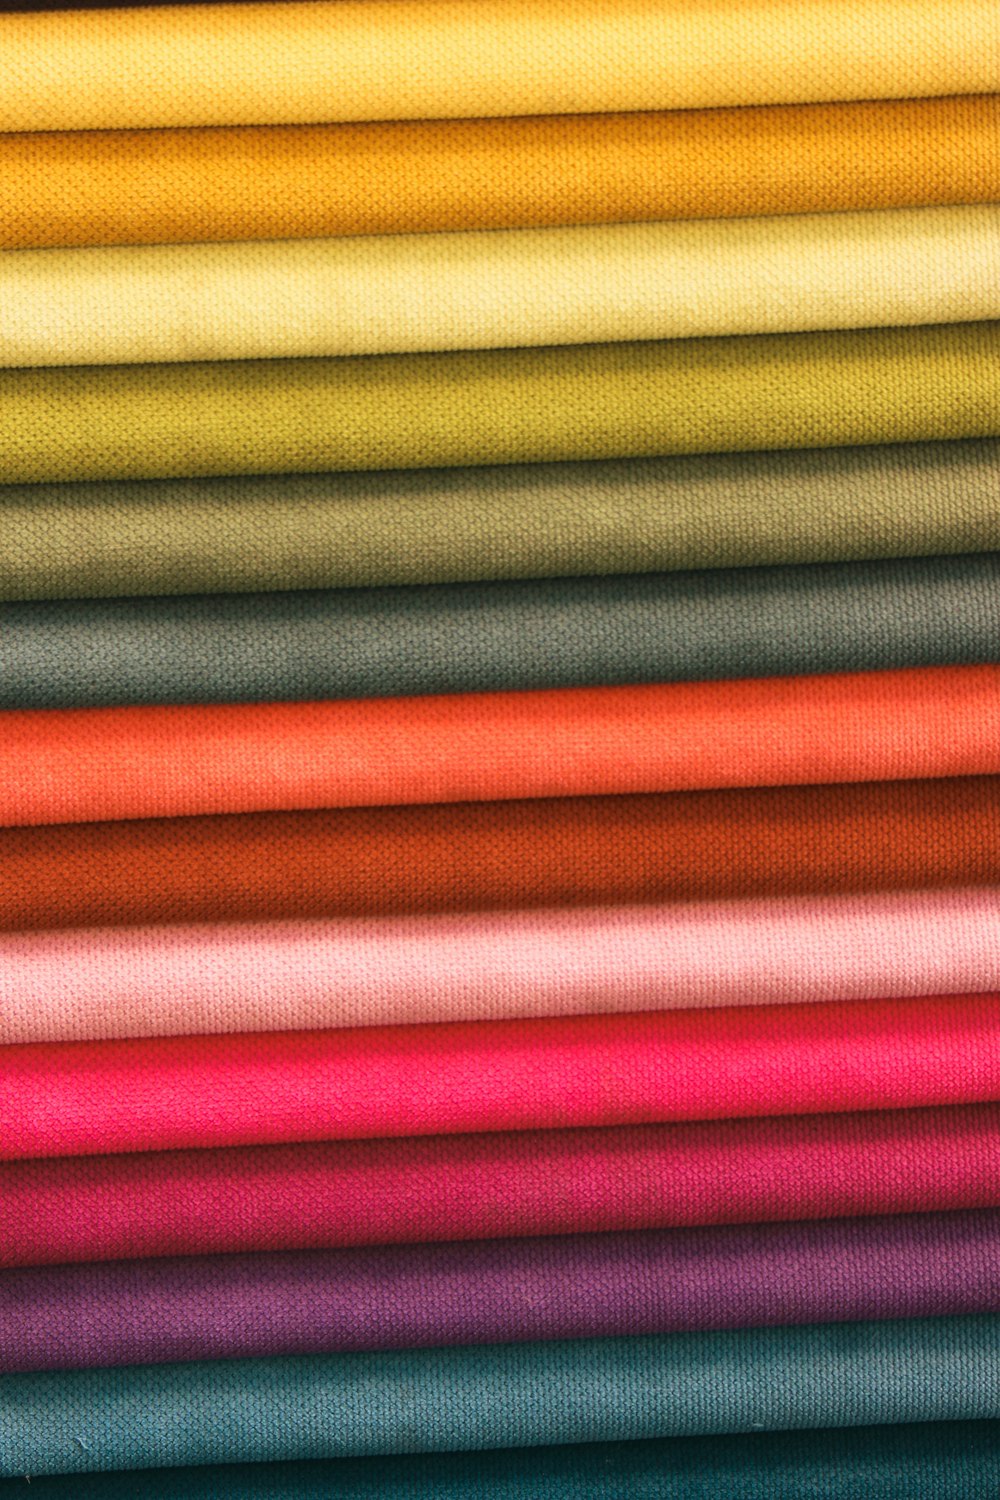 a close up of a red and yellow striped fabric